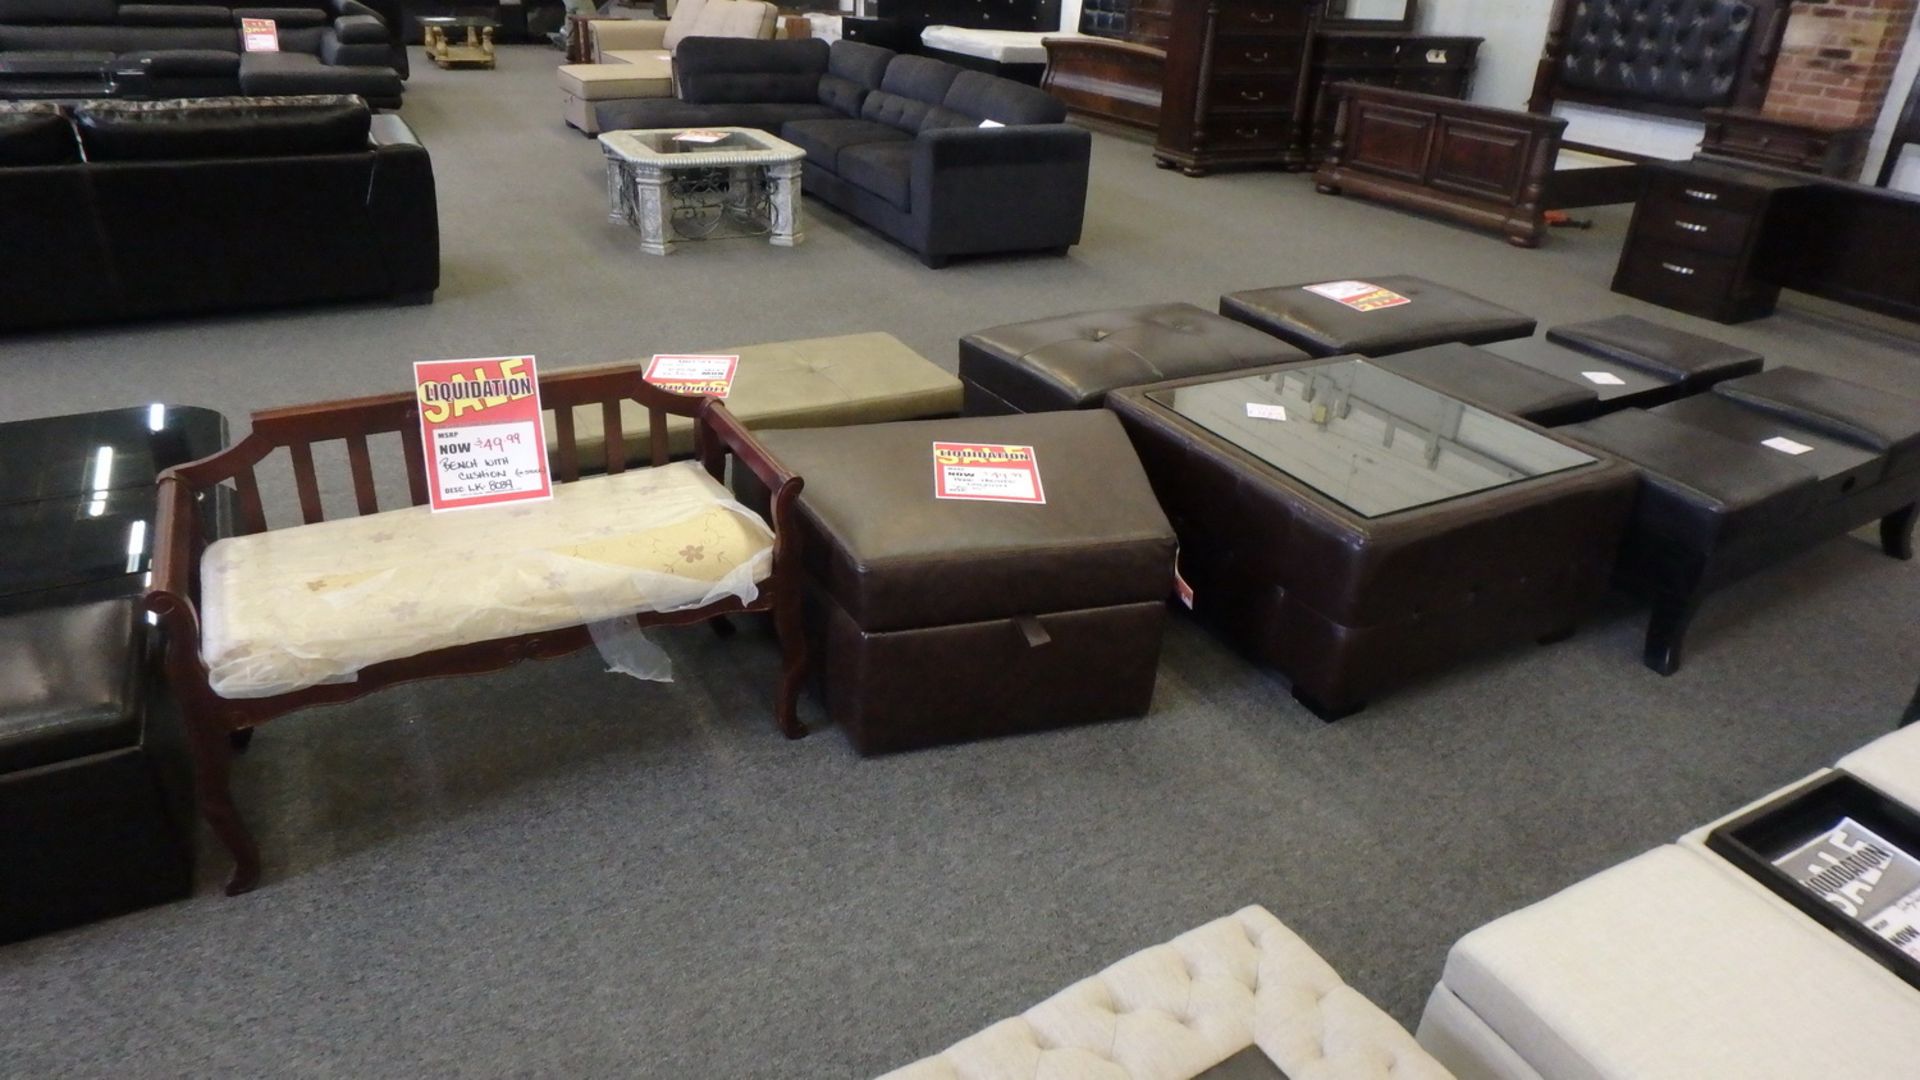 LOT - ASSORTED STORAGE OTTOMANS & BENCHES (FLOOR DISPLAYS) (12 UNITS) - Image 3 of 3